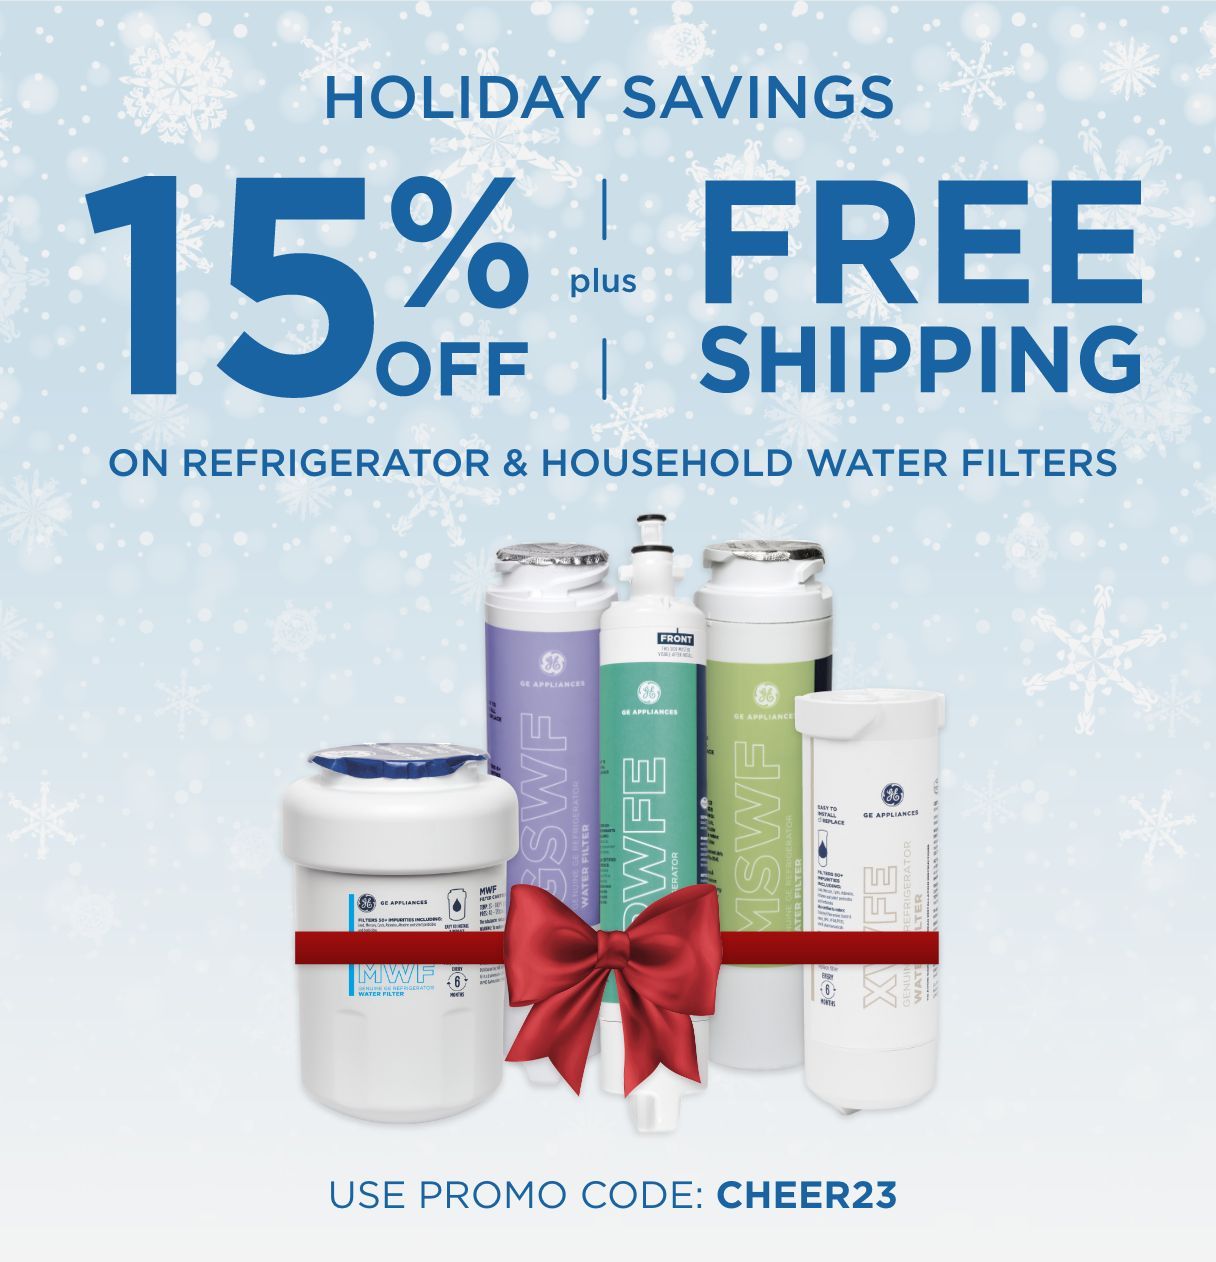 Save 15% plus FREE shipping on Refrigerator Household water filters